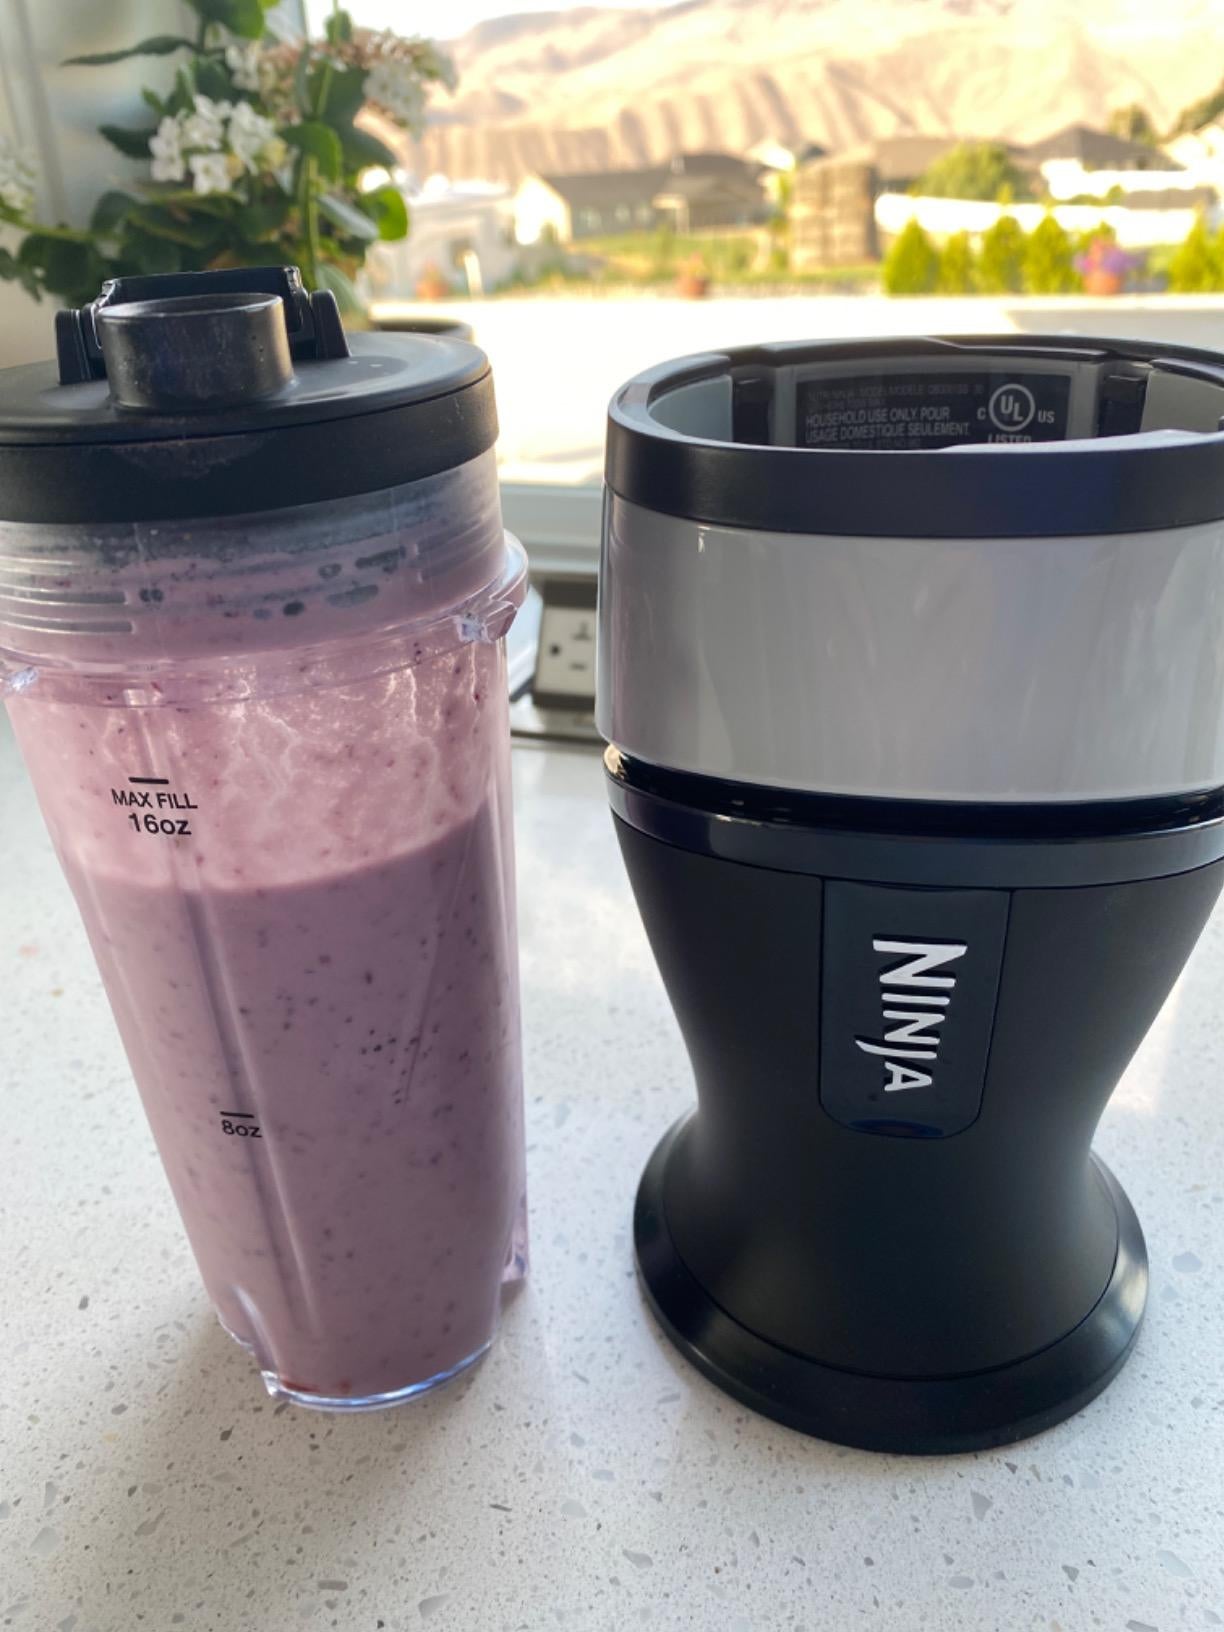 a smoothie cup beside the ninja blender